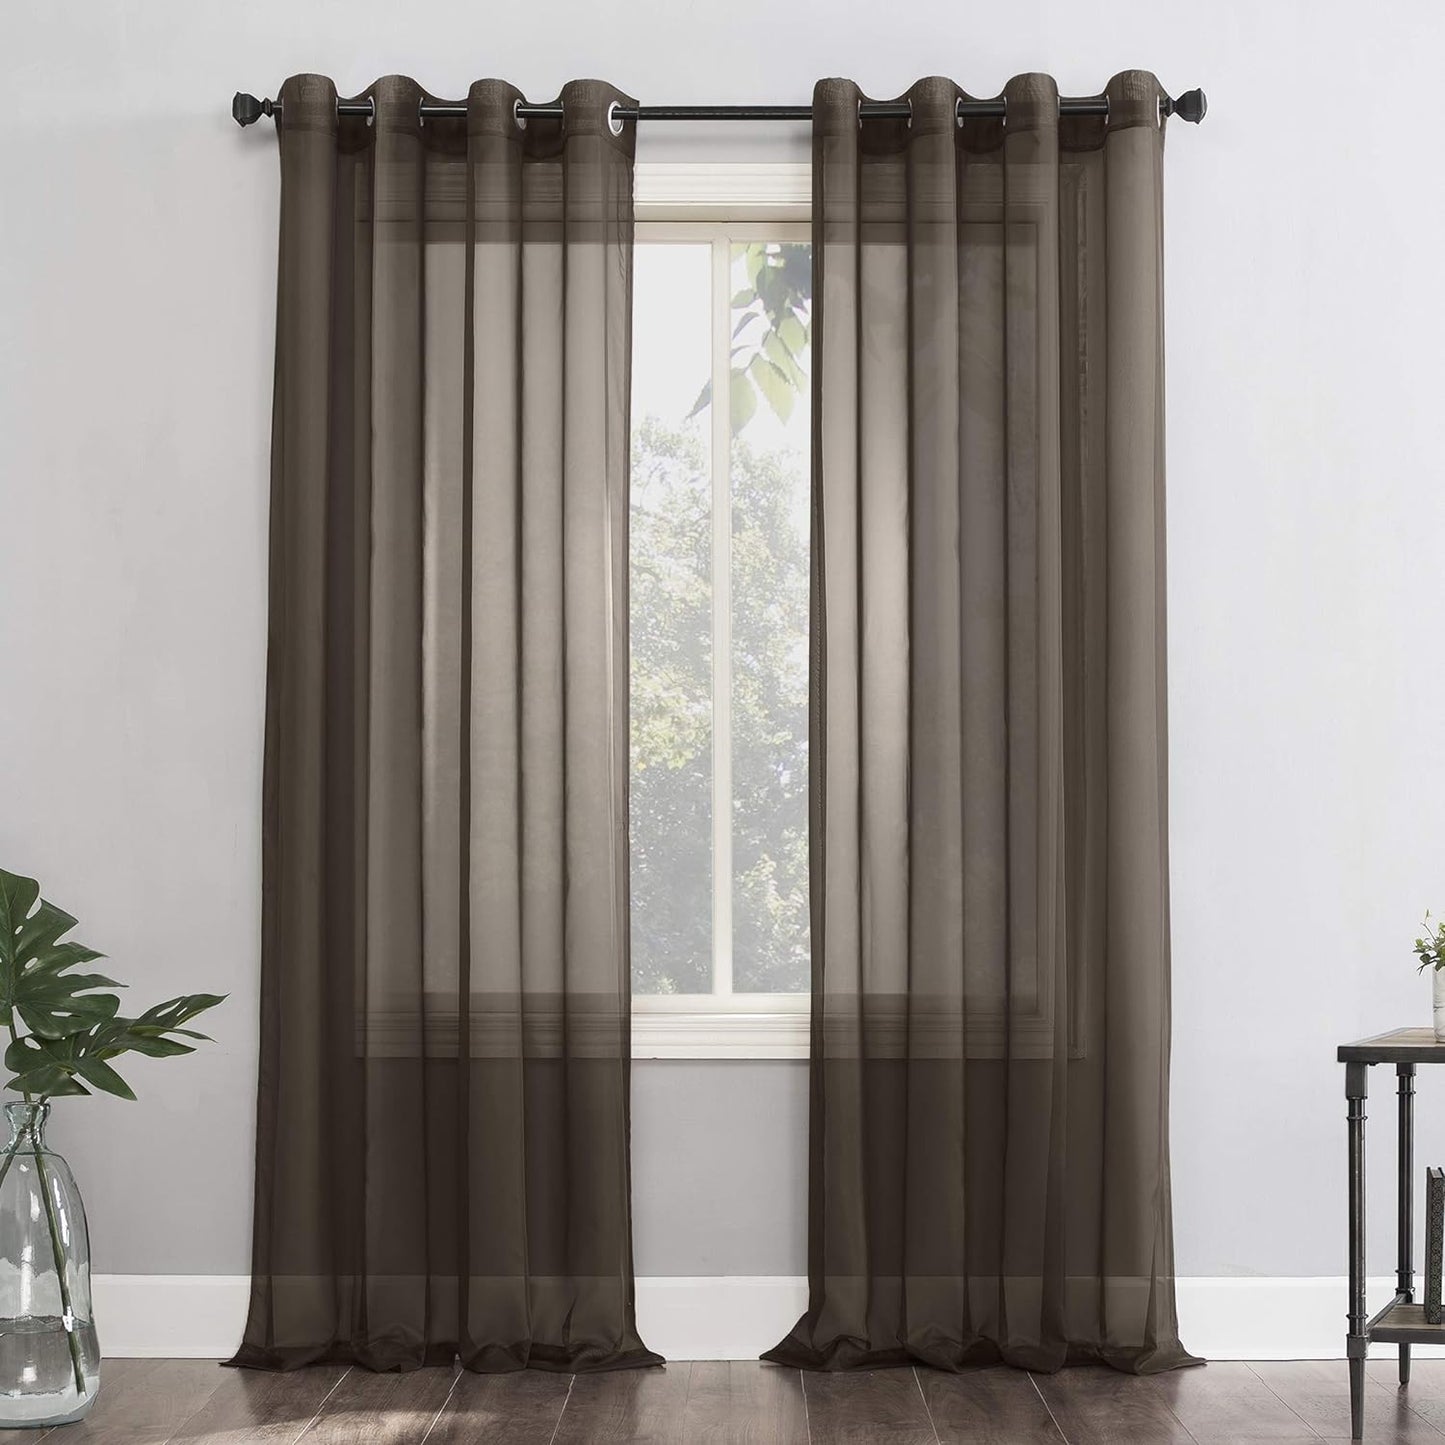 No. 918 Emily Sheer Voile Grommet Curtain Panel, 59" X 95", White  No. 918 Sable Curtain Panel 59" X 95"